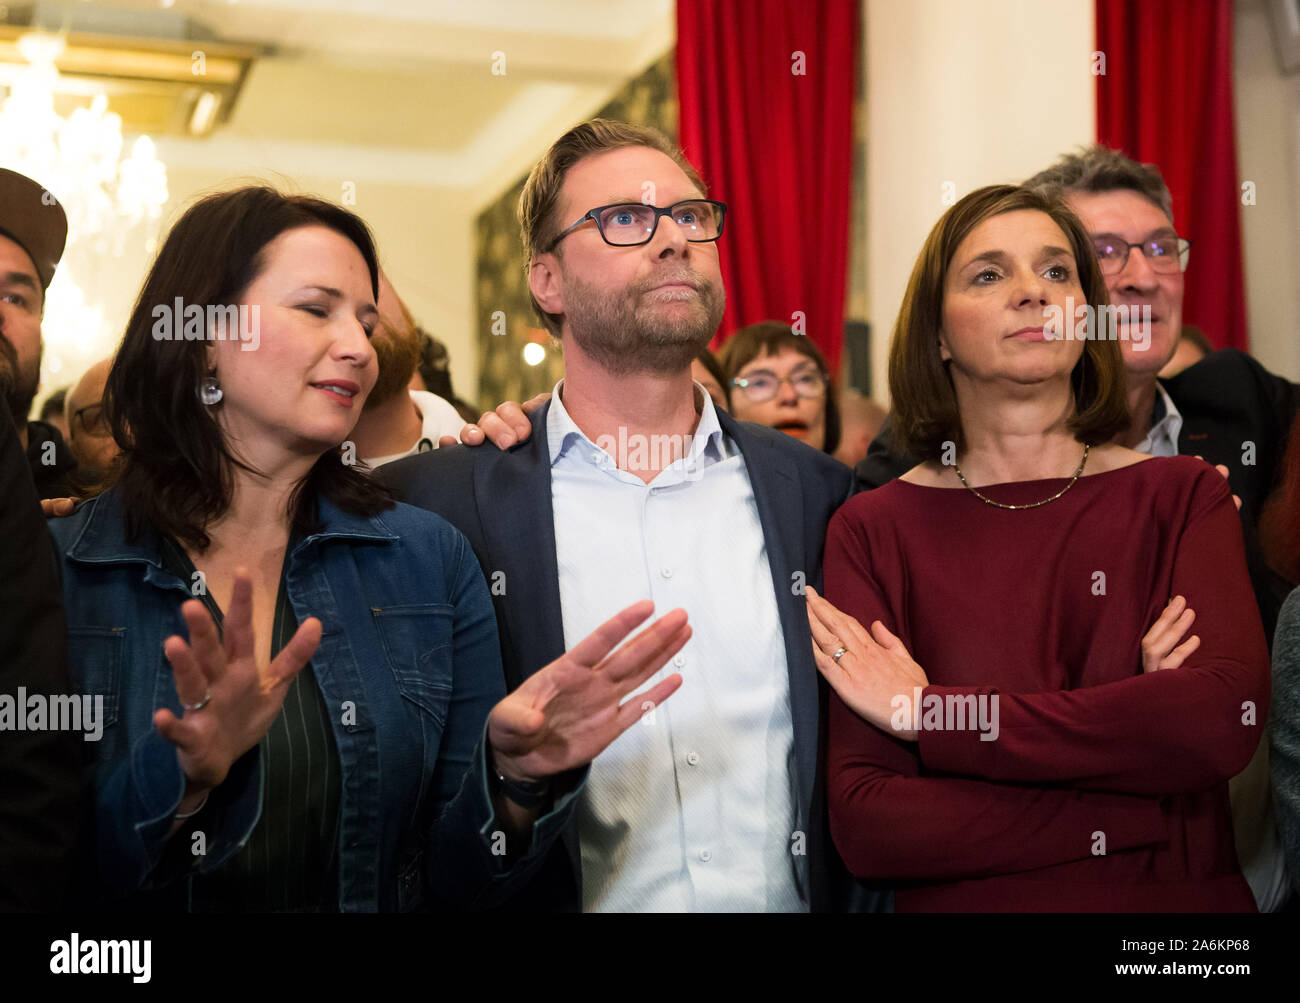 Erfurt, Germany. 27th Oct, 2019. Anja Siegesmund (l-r), the leading candidate of the party Bündnis 90/Die Grünen, Dirk Adams, leading candidate of Bündnis 90/Die Grünen, and Katrin Göring-Eckardt, parliamentary party leader of the Greens in the Bundestag, consider the first projections at the Green election party. Credit: Daniel Naupold/dpa/Alamy Live News Stock Photo